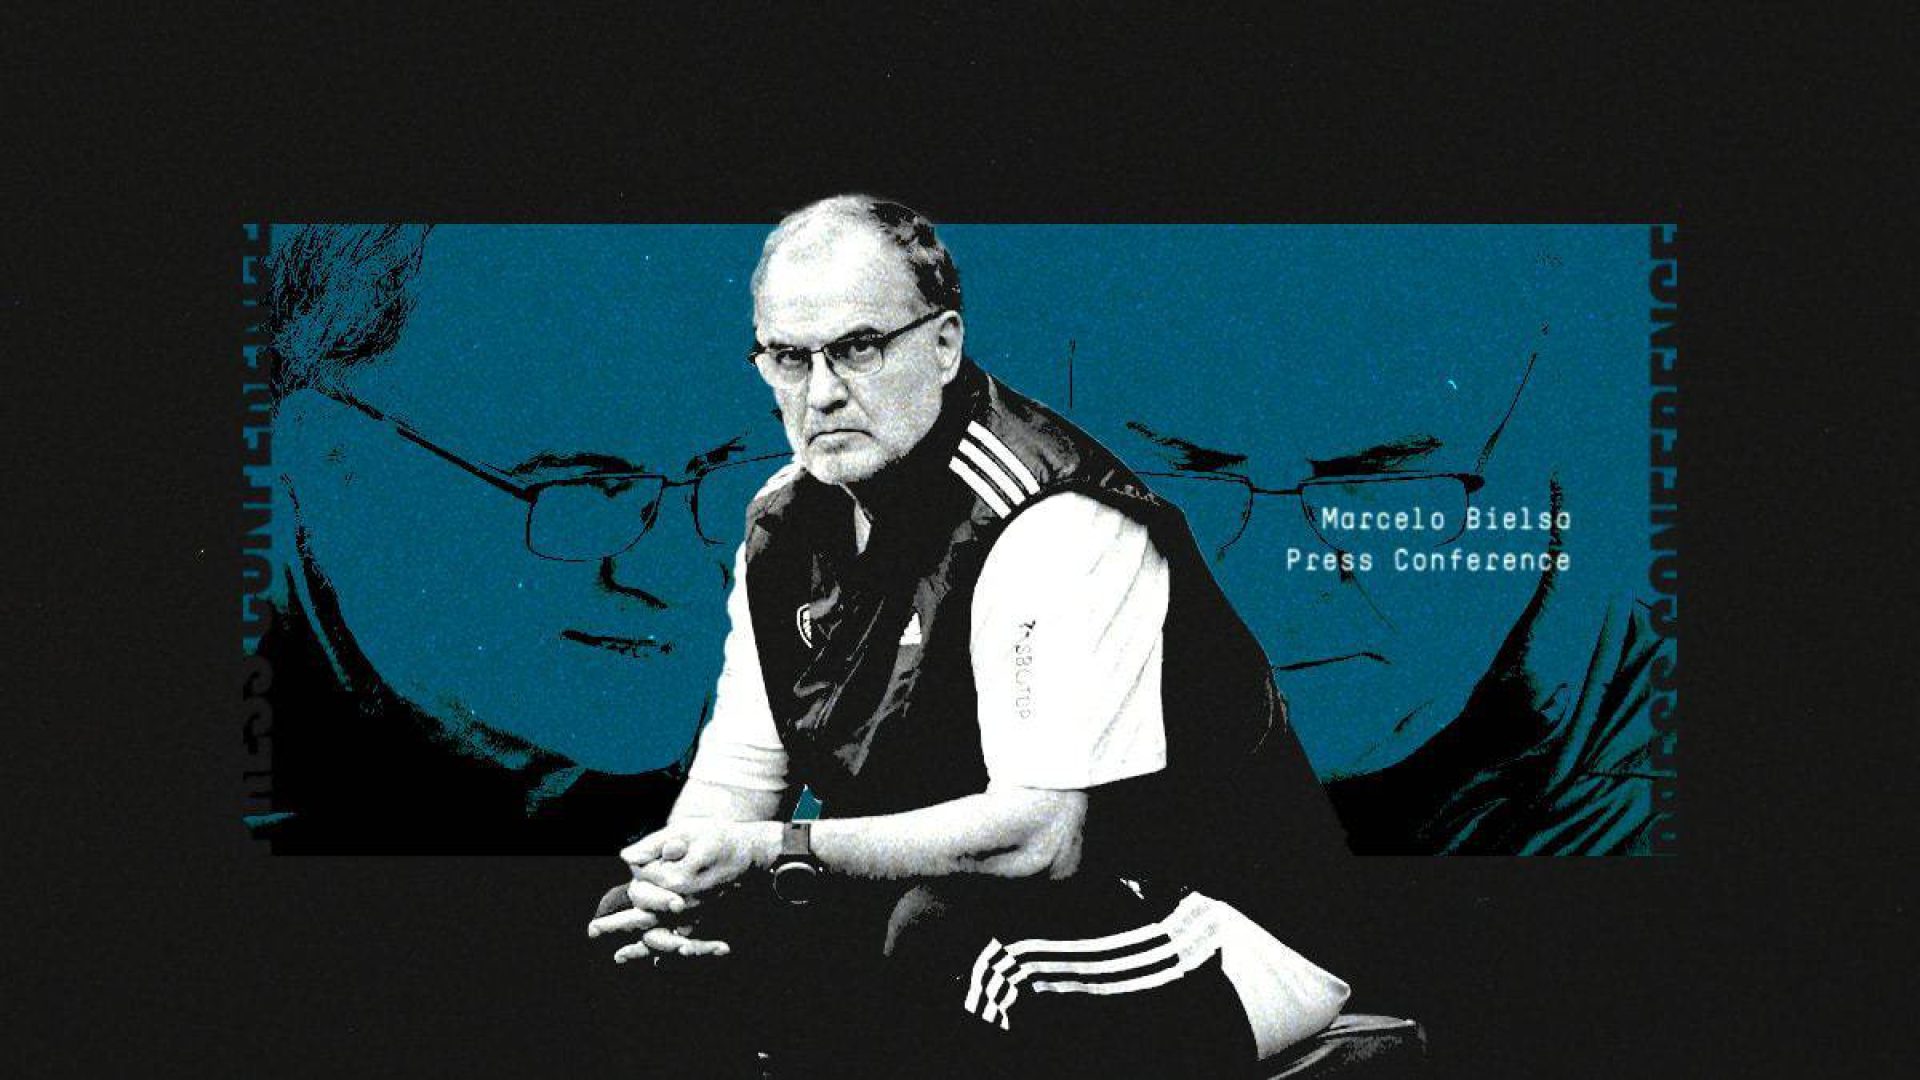 A graphic showing Marcelo Bielsa looking serious